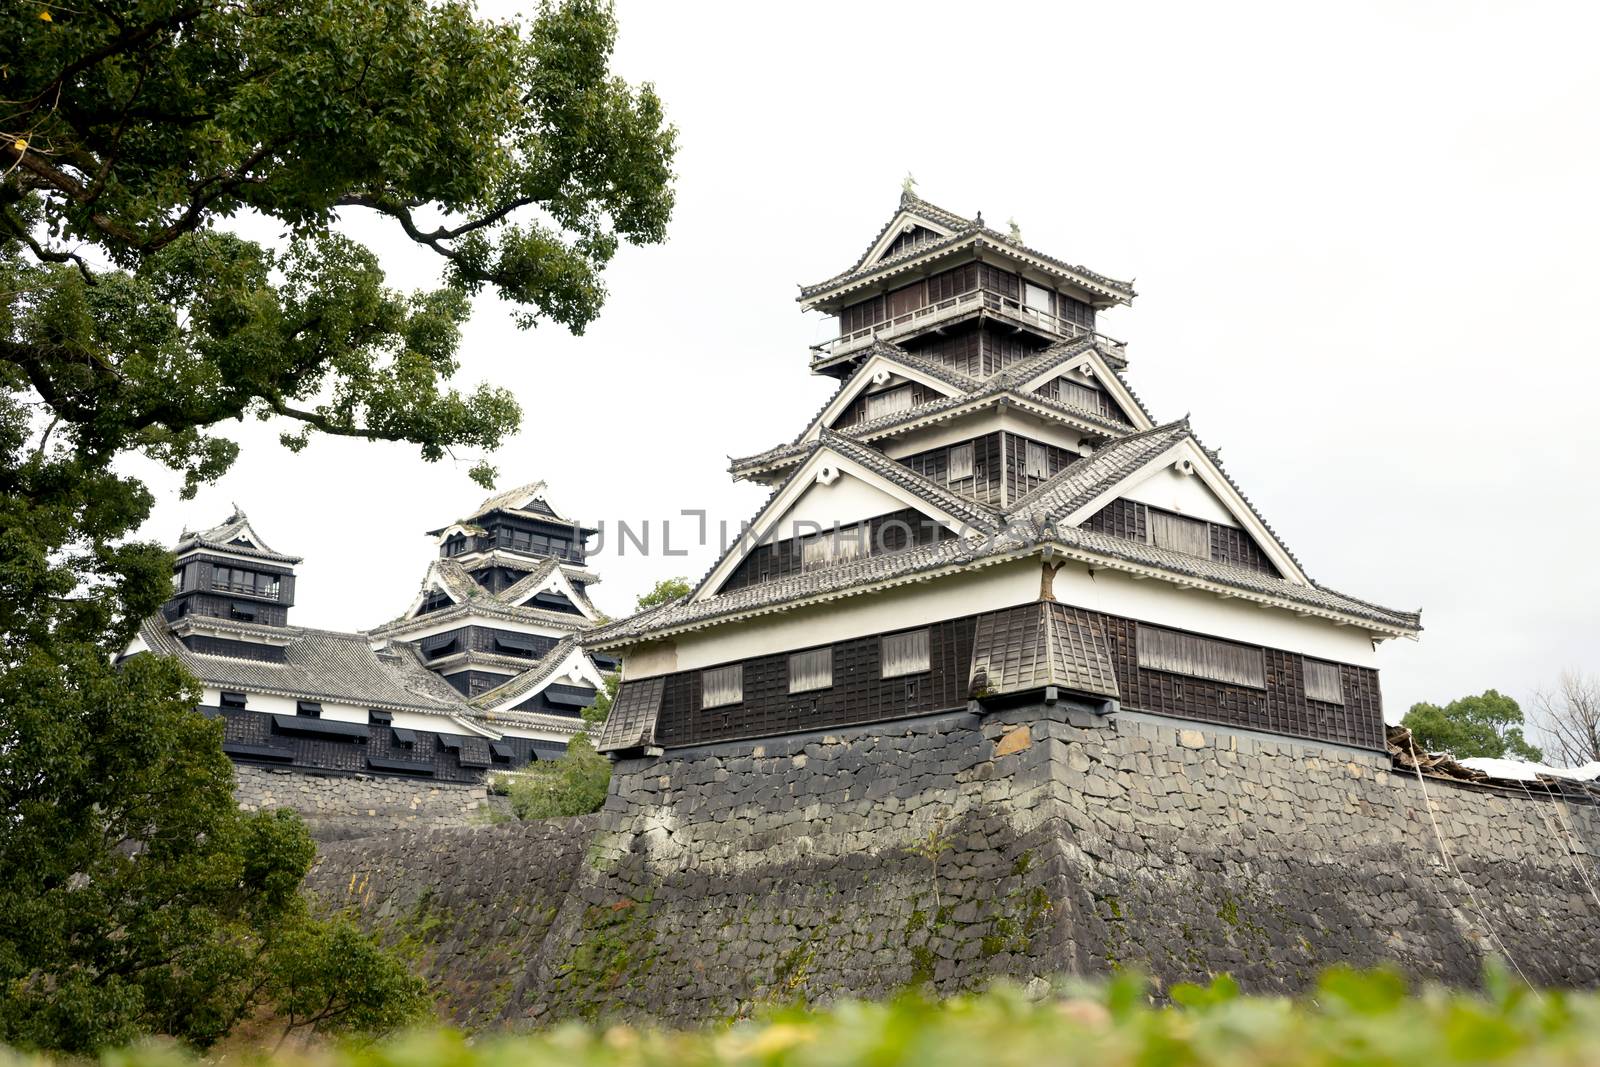 KUMAMOTO - DEC,16 : Landscape of Kumamoto castle, a hilltop Japanese castle located in Kumamoto Prefecture on the island of Kyushu.The main castle was damaged by earthquake and now repairing. JAPAN DEC,16 2016